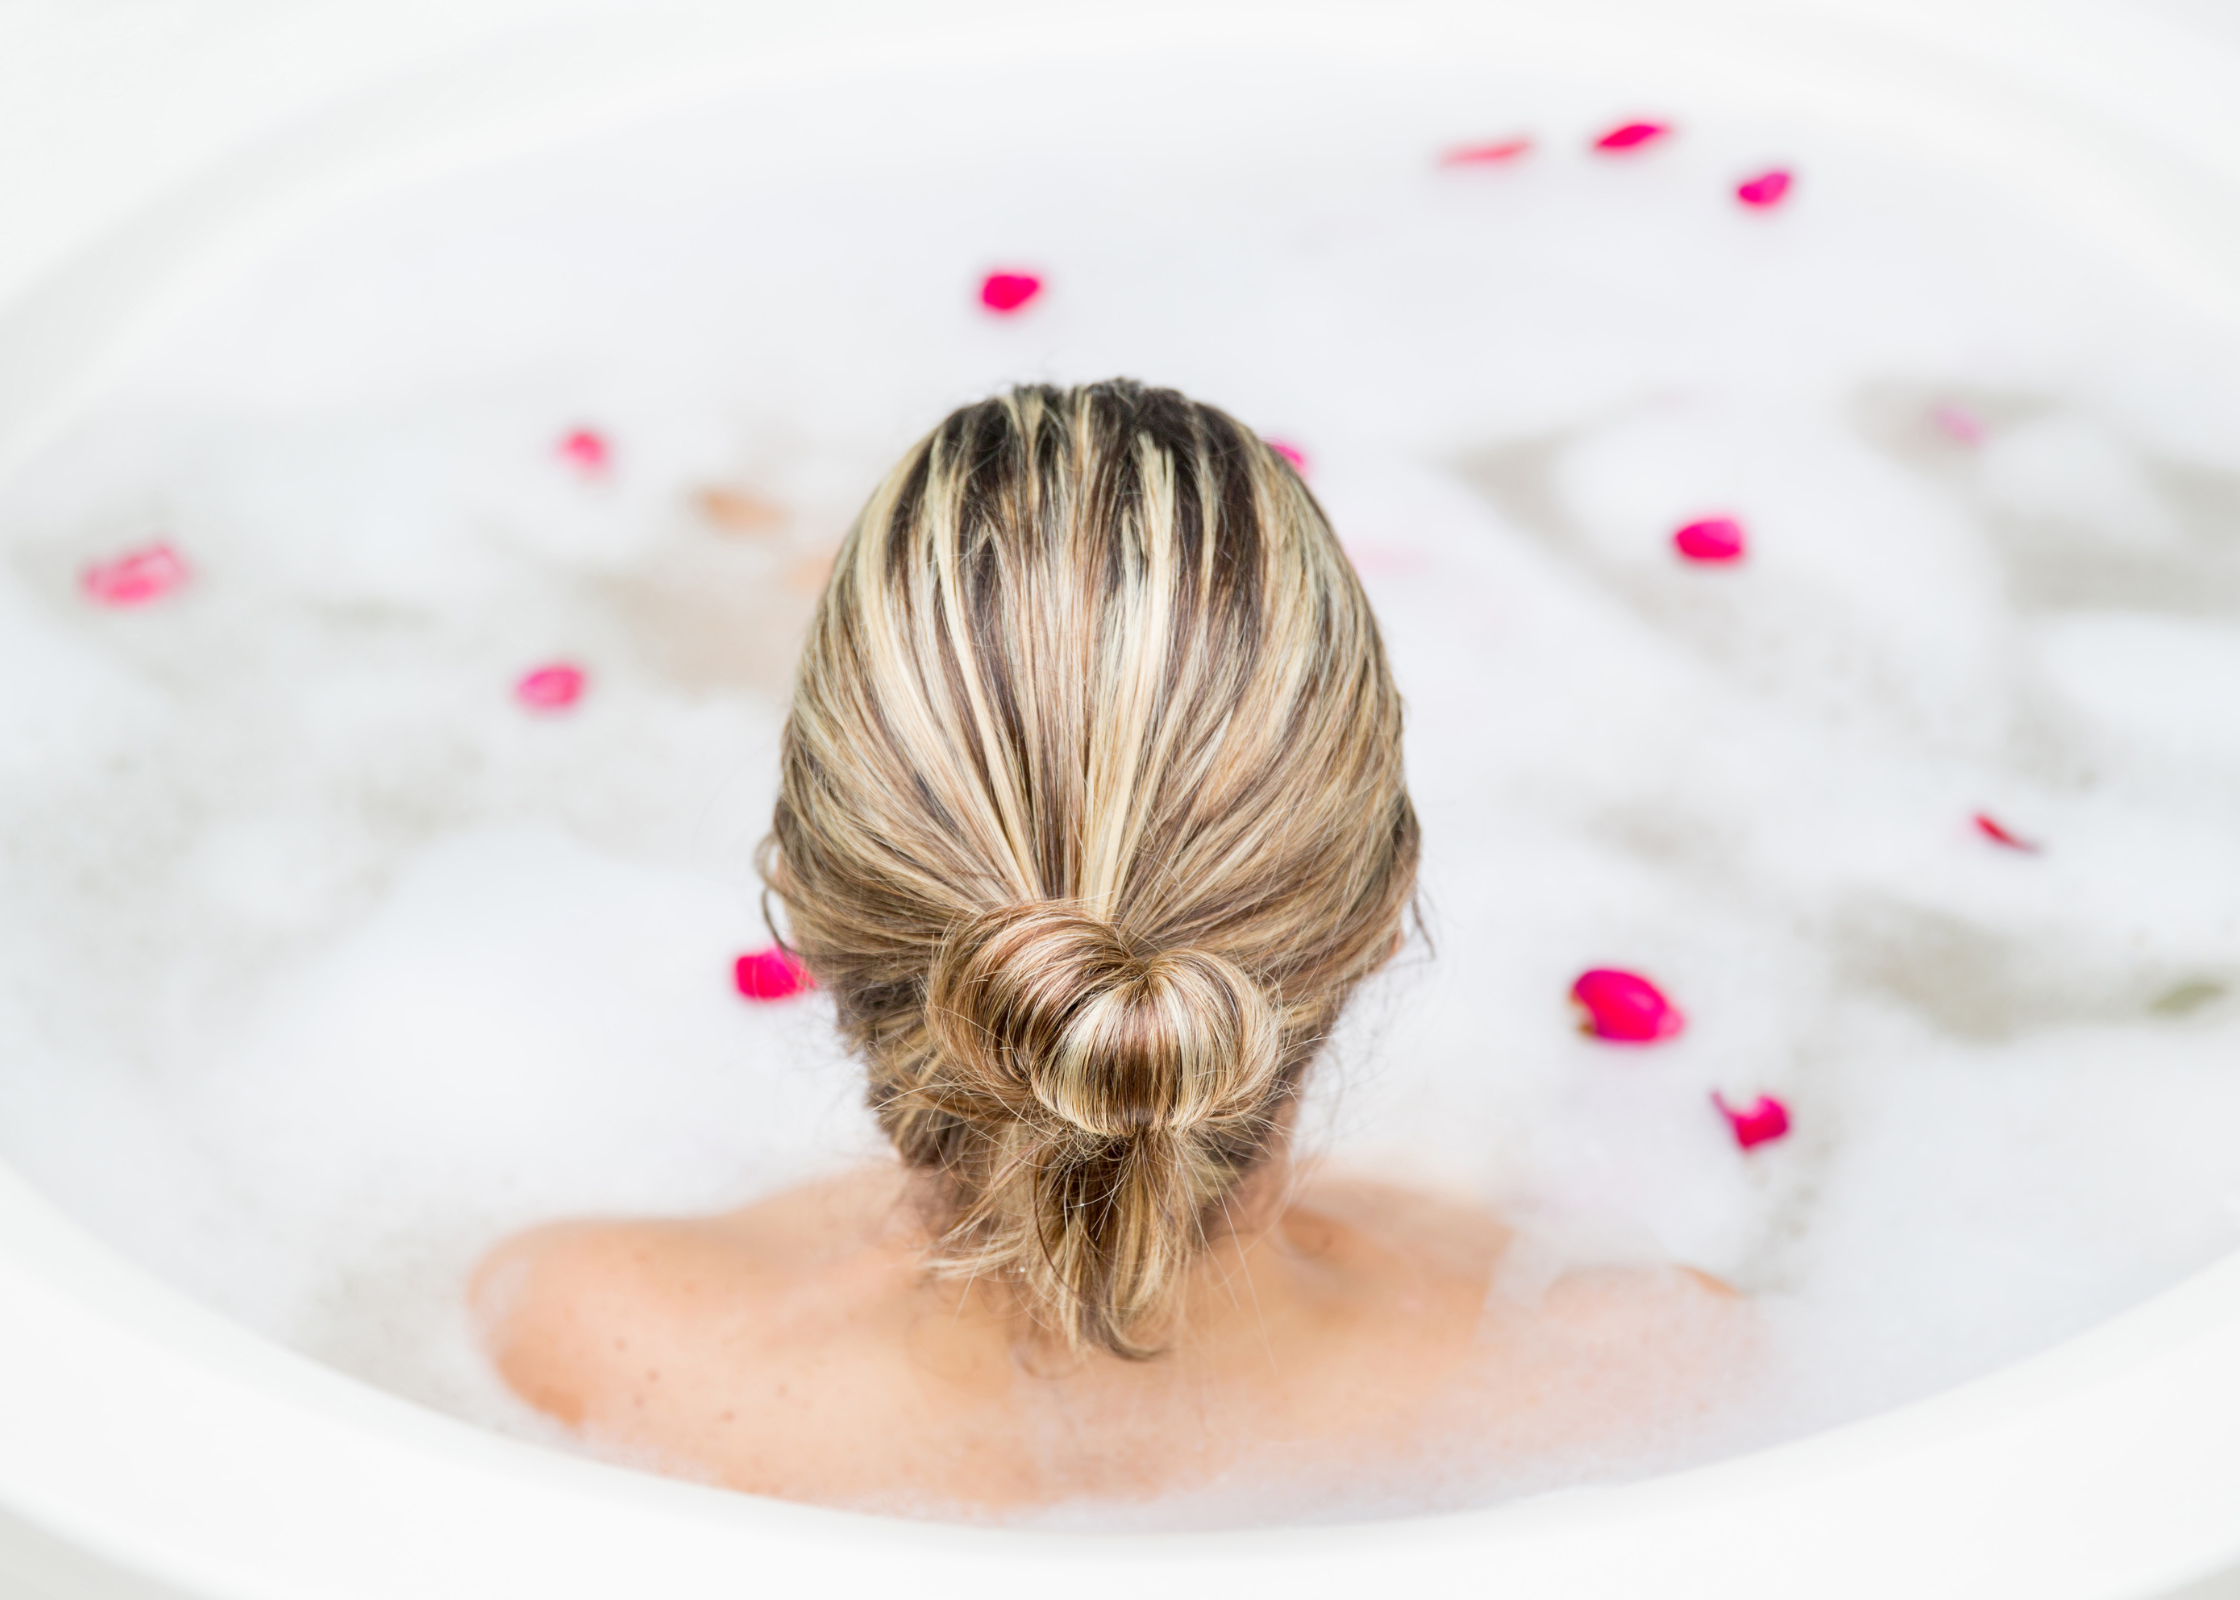 woman sitting in bubble bath with flower petals. how to take time for yourself. self care ideas for mind body and soul. self-care ideas for mental health. me time ideas